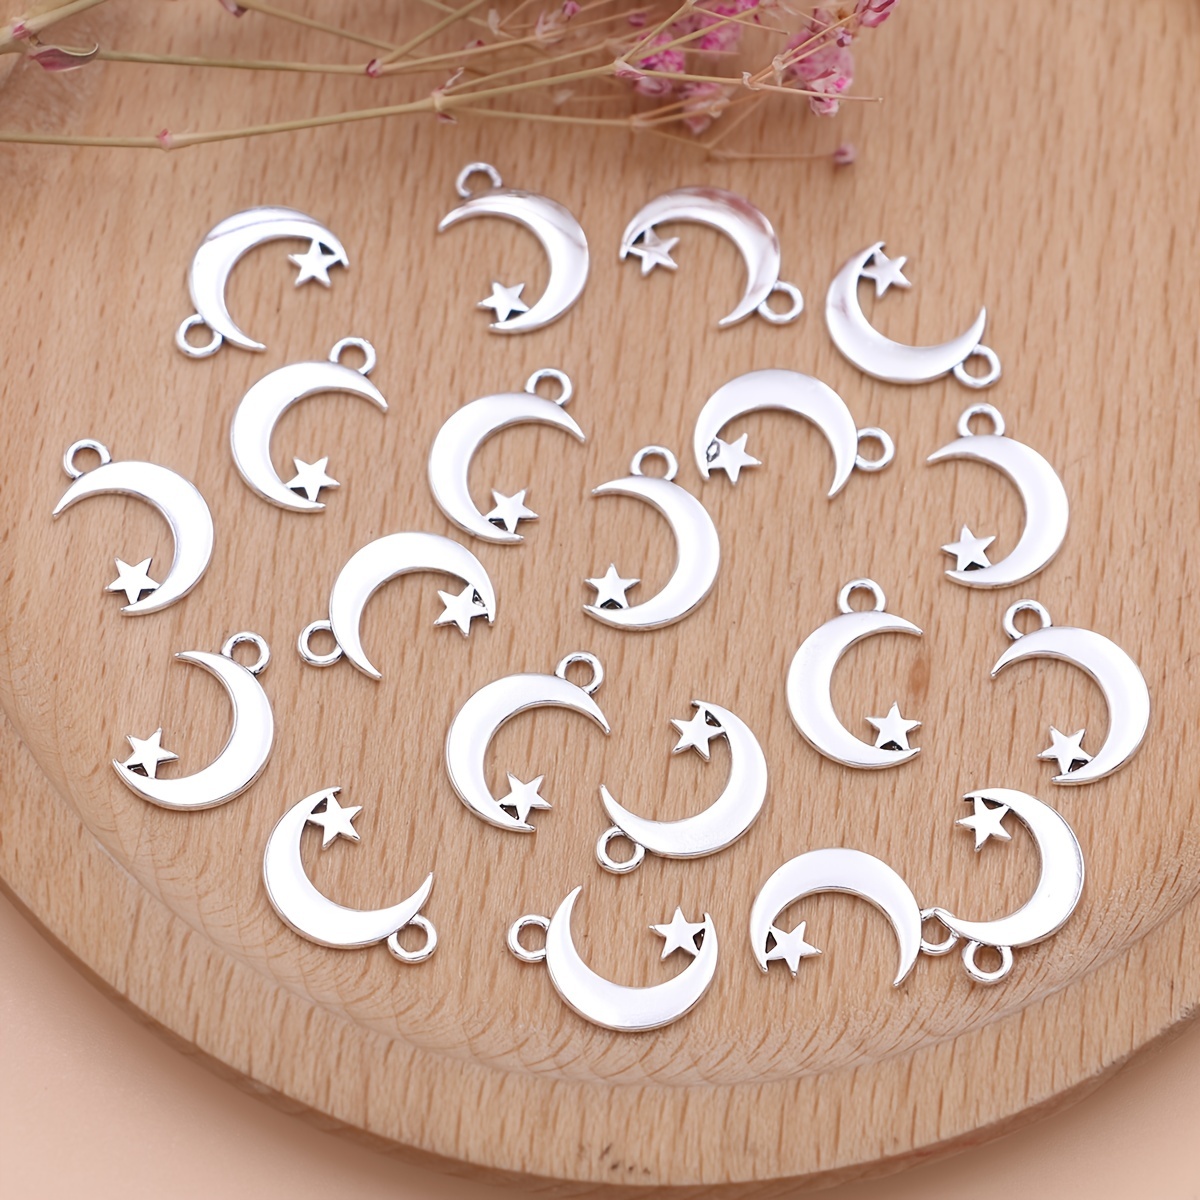 24PCS Mix Alloy Enamel Moon Star Charms For Jewelry Making Handmade  Earrings Necklace Bracelet Pendant DIY Finding Accessories